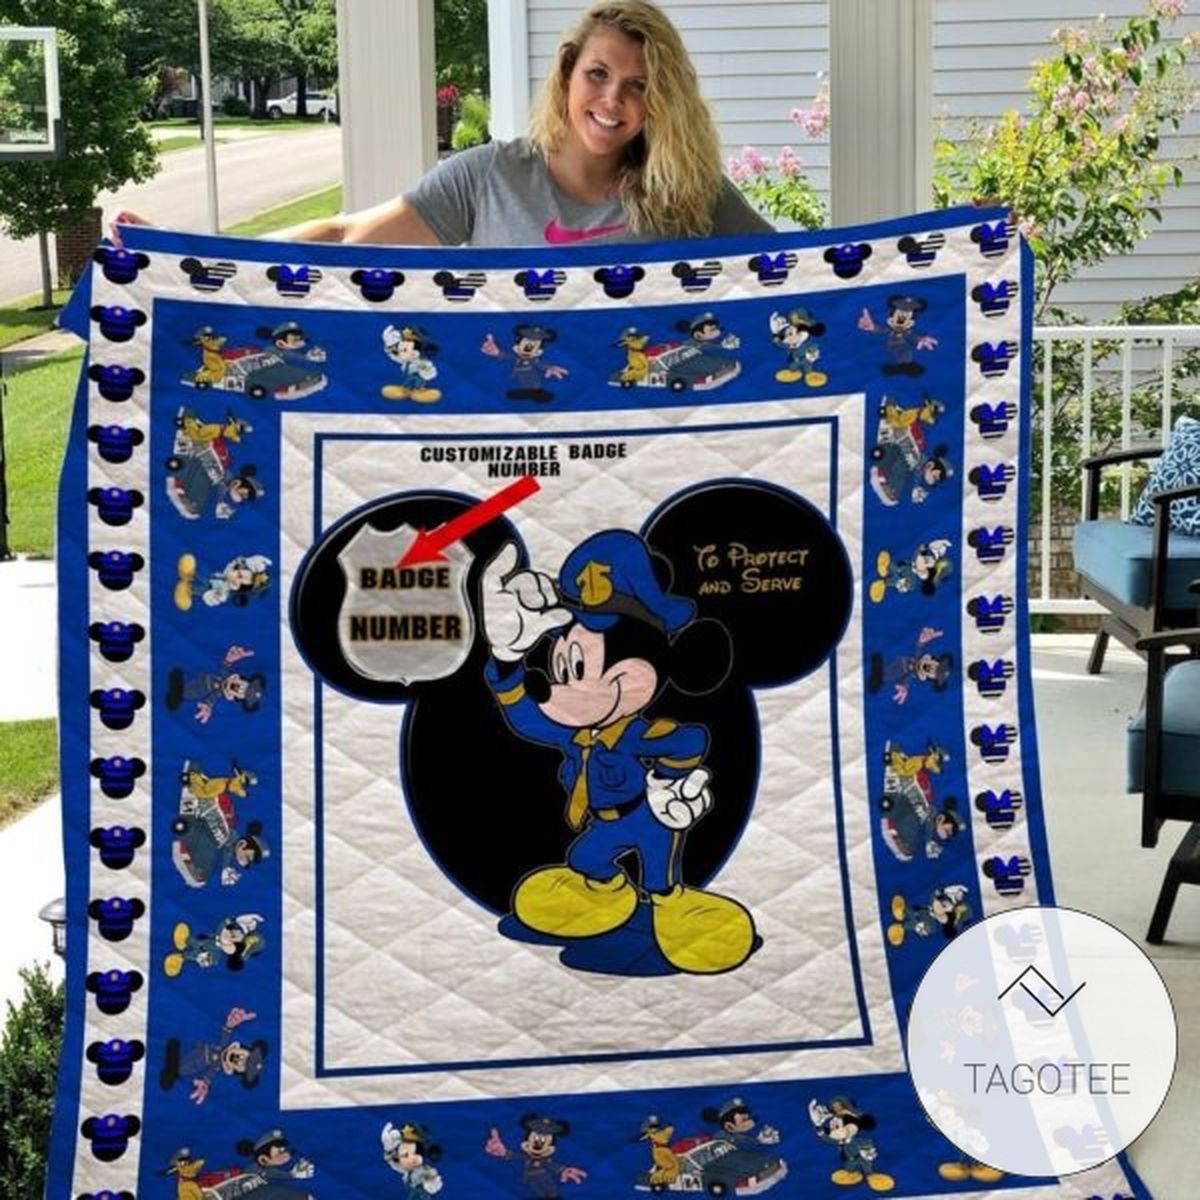 Mickey Mouse Police Customizable Badge Number Quilt Blanket